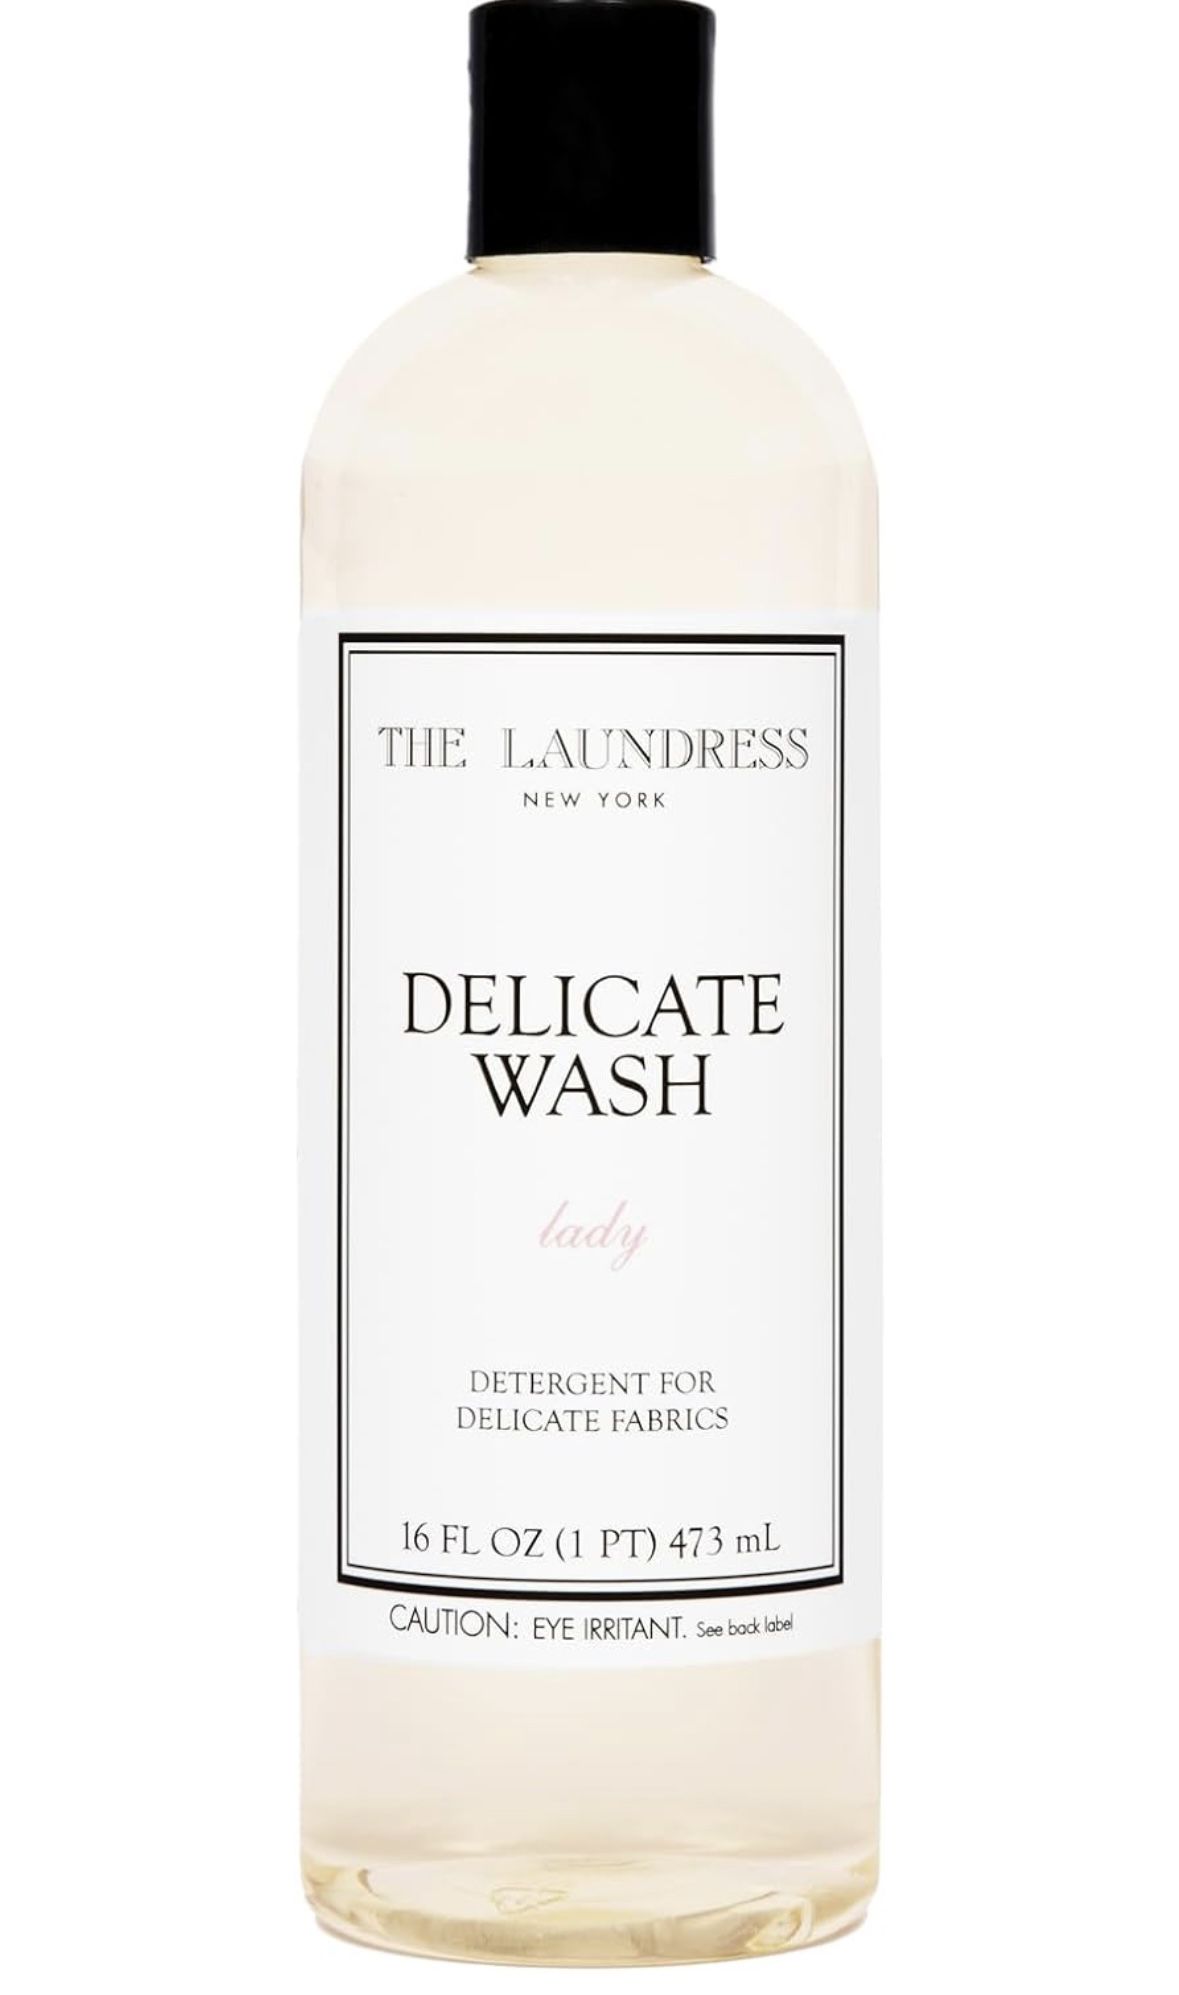 The Laundress New York ‘Lady’ Delicate Wash Detergent 16 Fl Oz + Measuring Cup